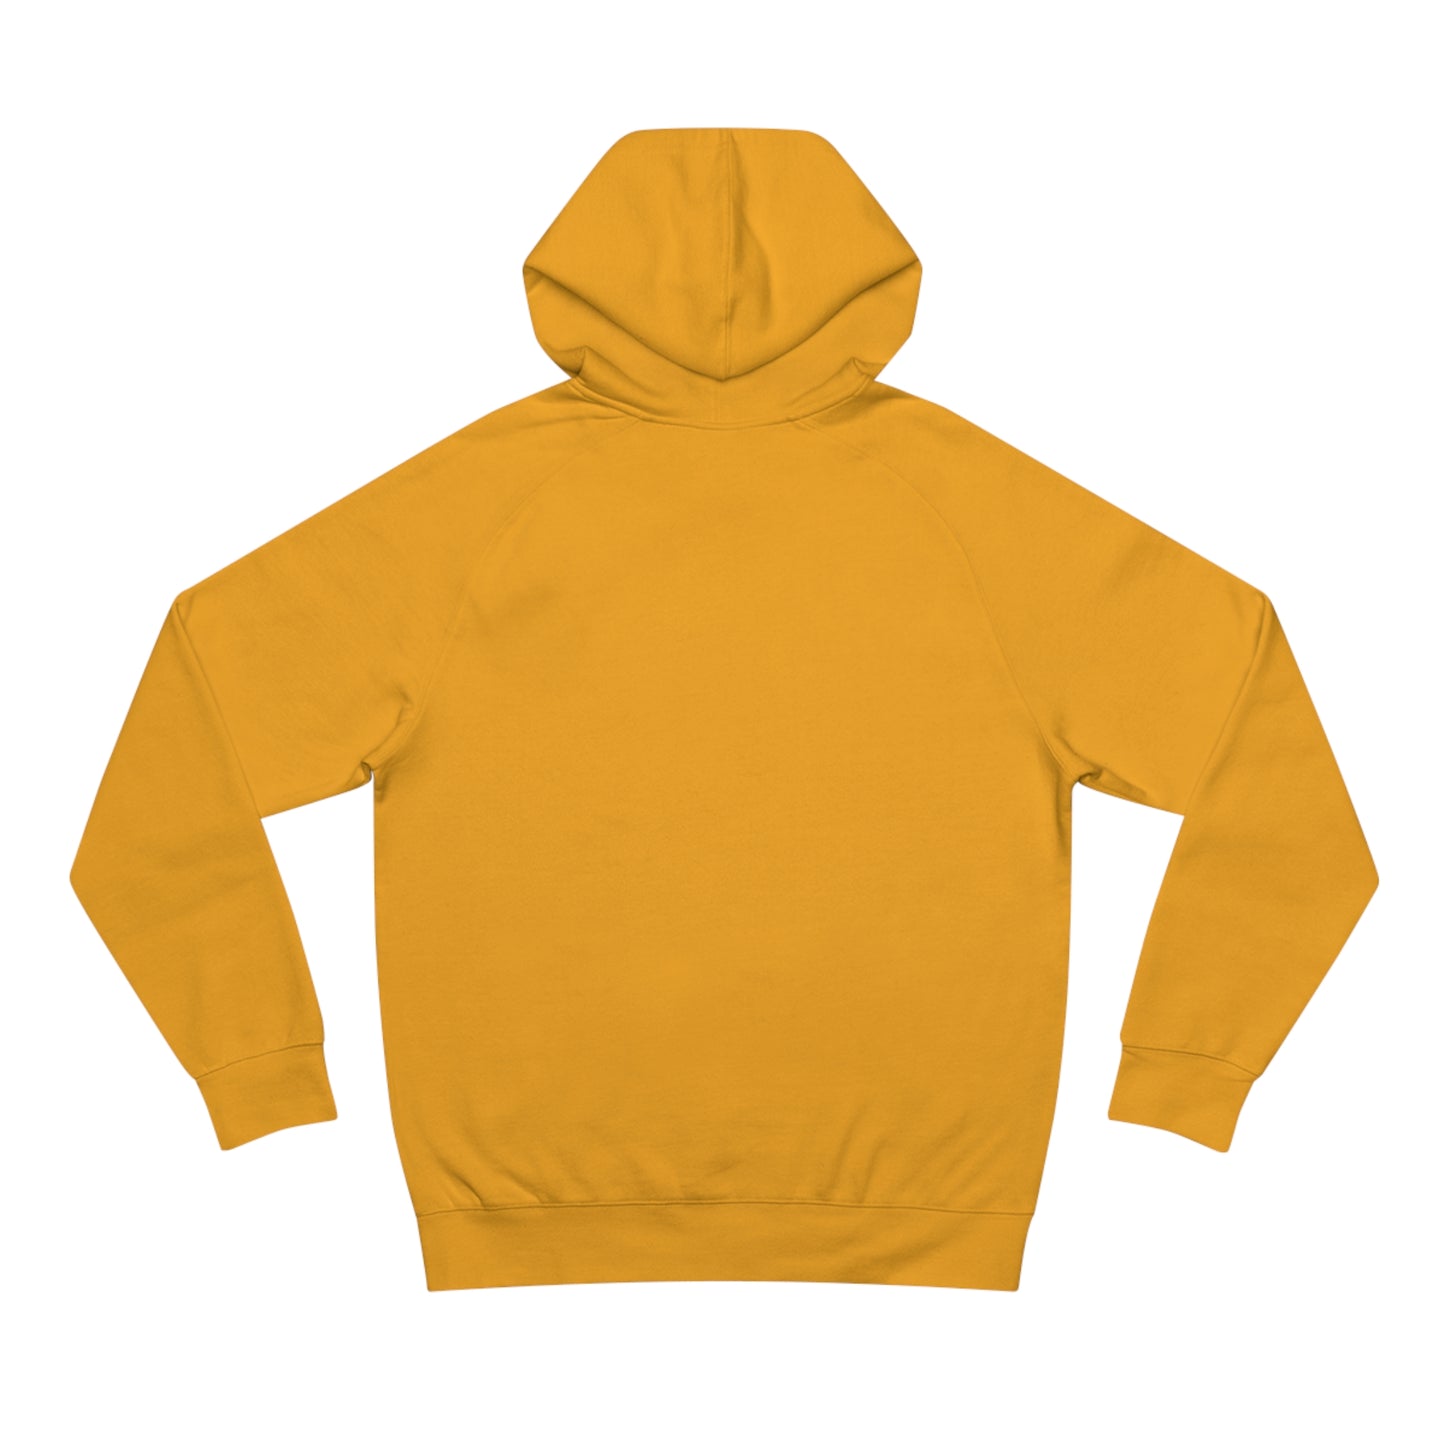 One more cast hoodie